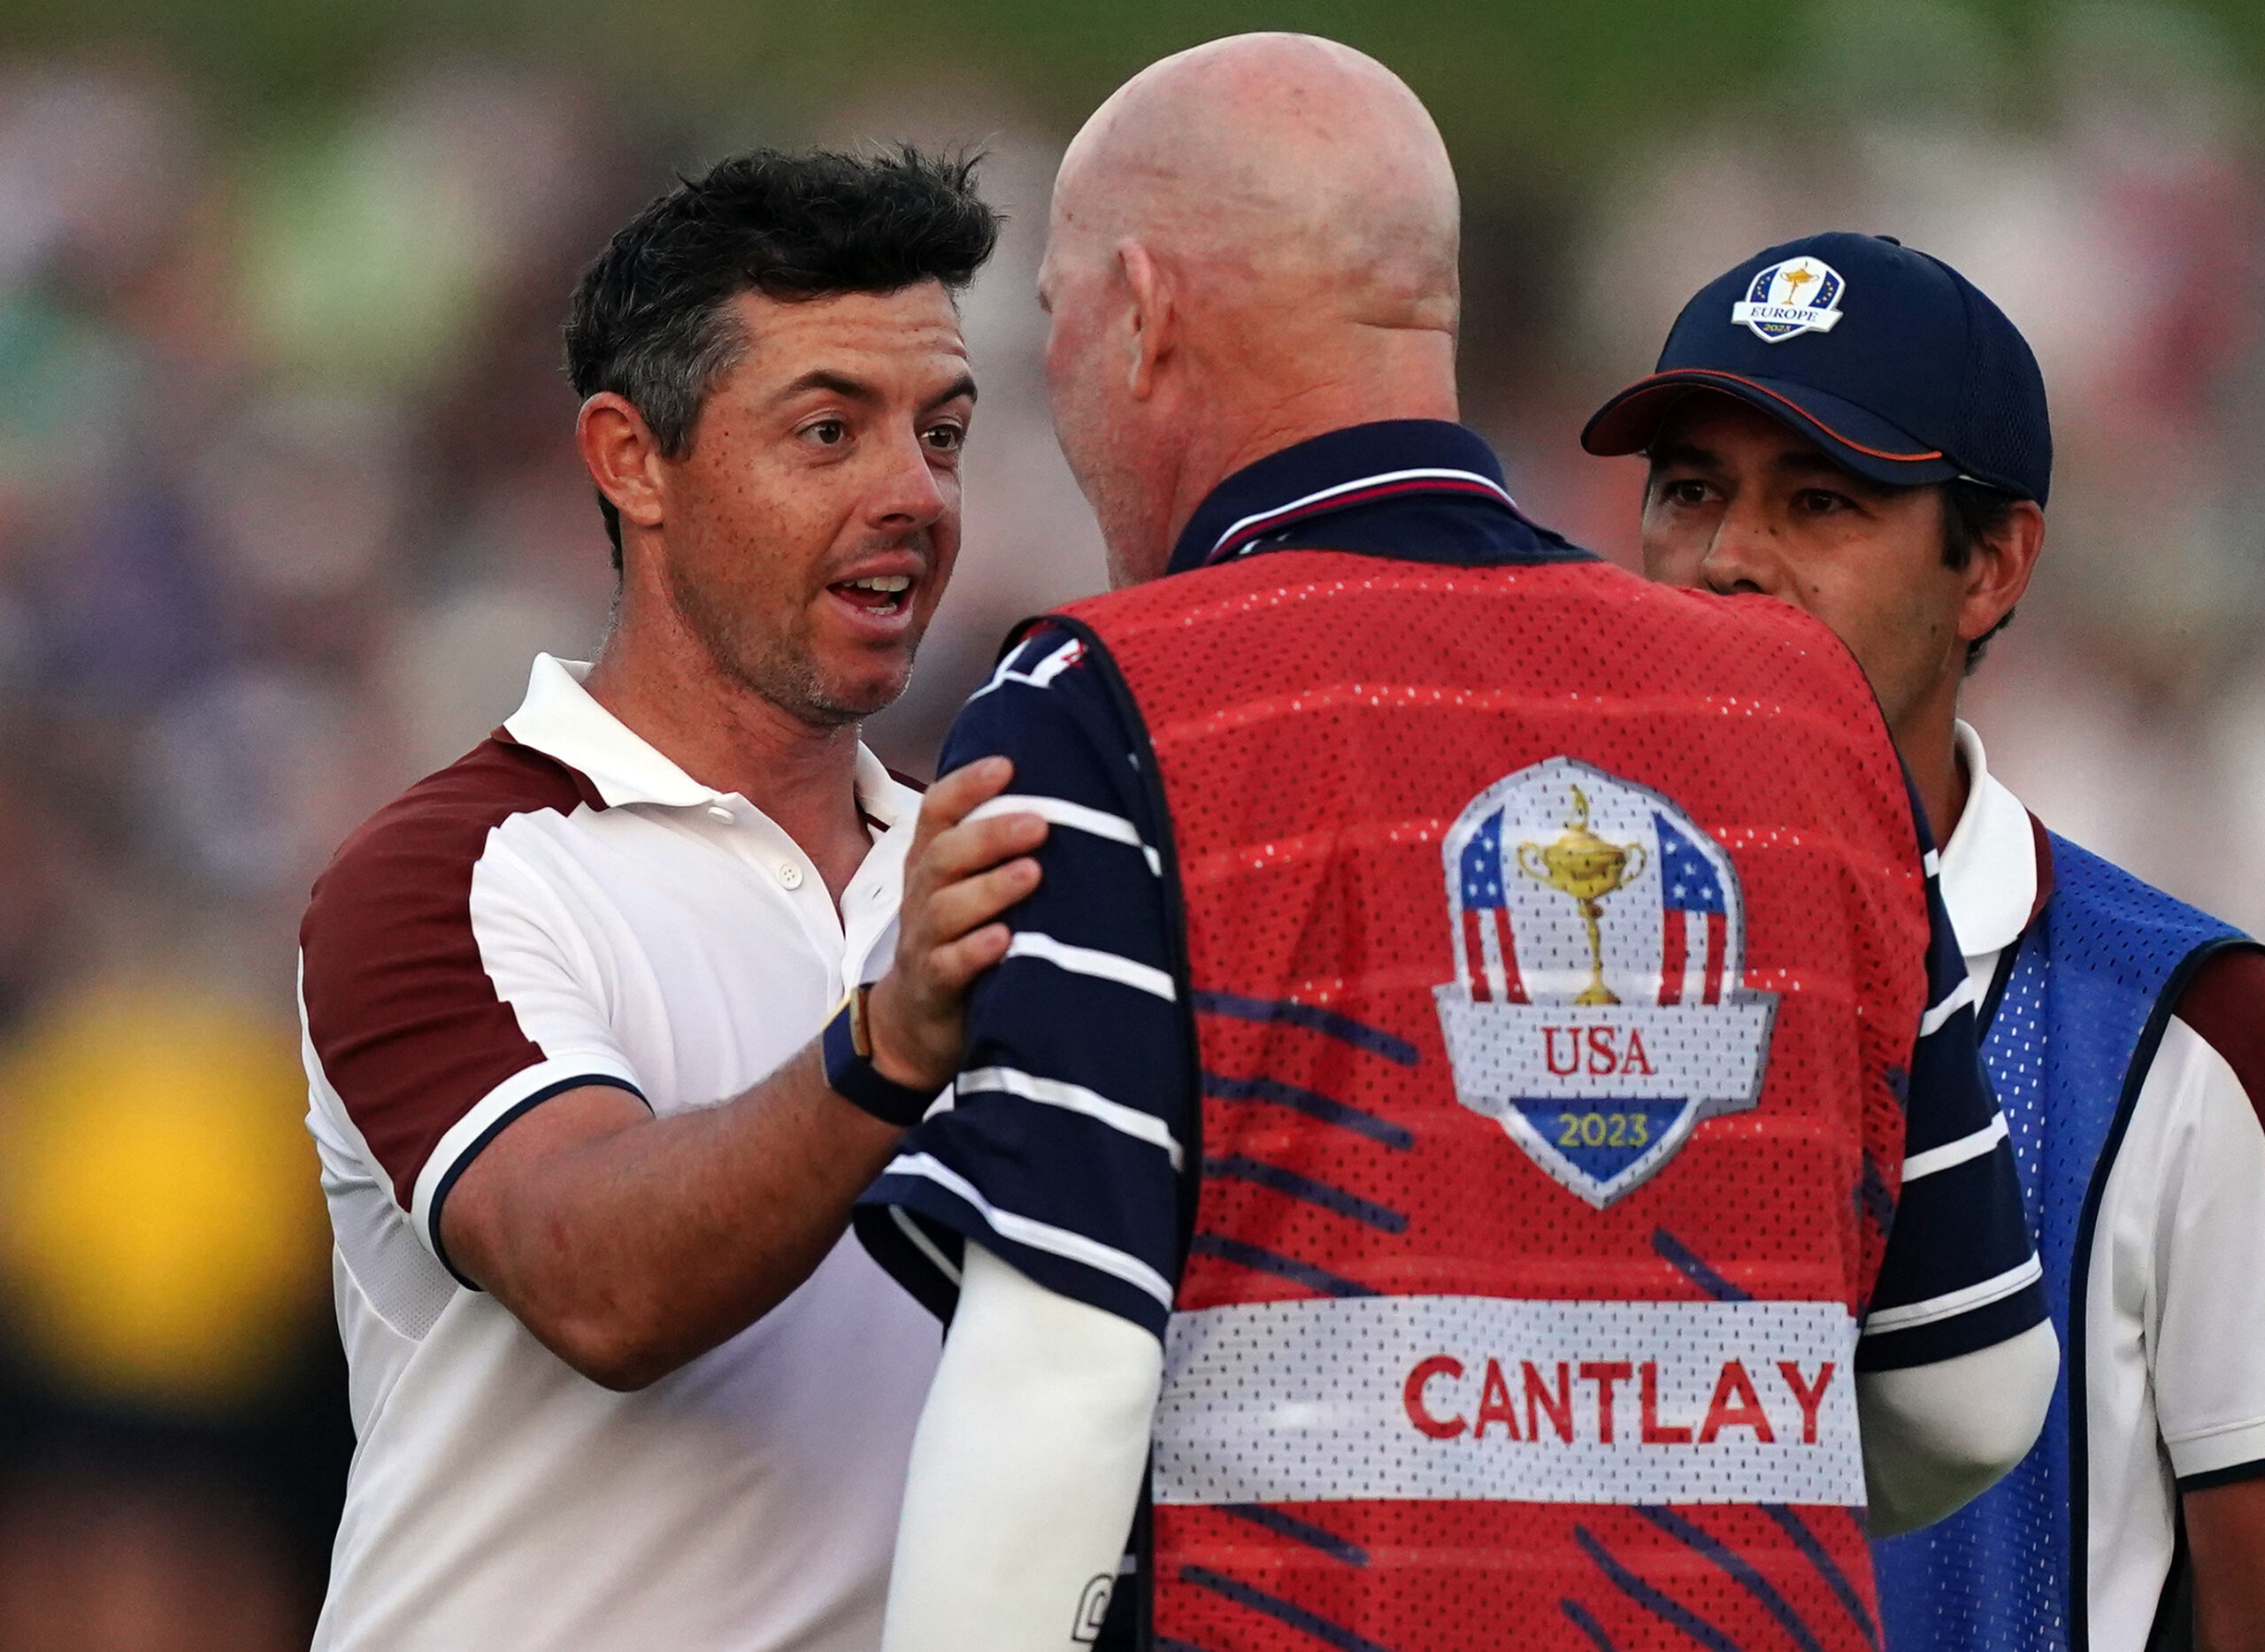 Rory McIlroy argues with Joe LaCava